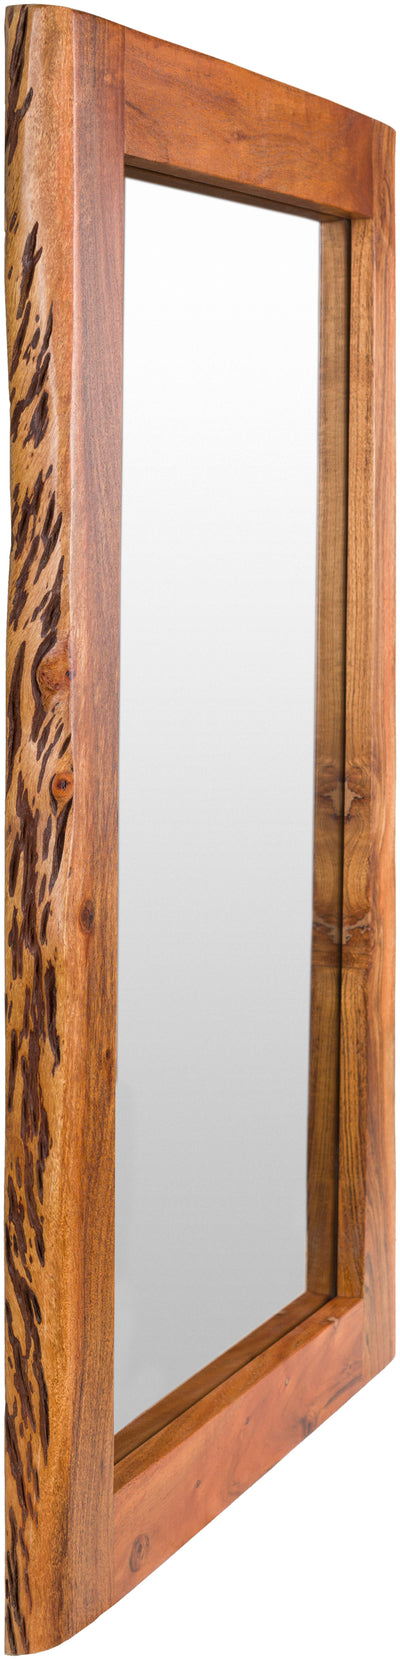 product image for Edge DGE-100 Rectangular Mirror by Surya 61